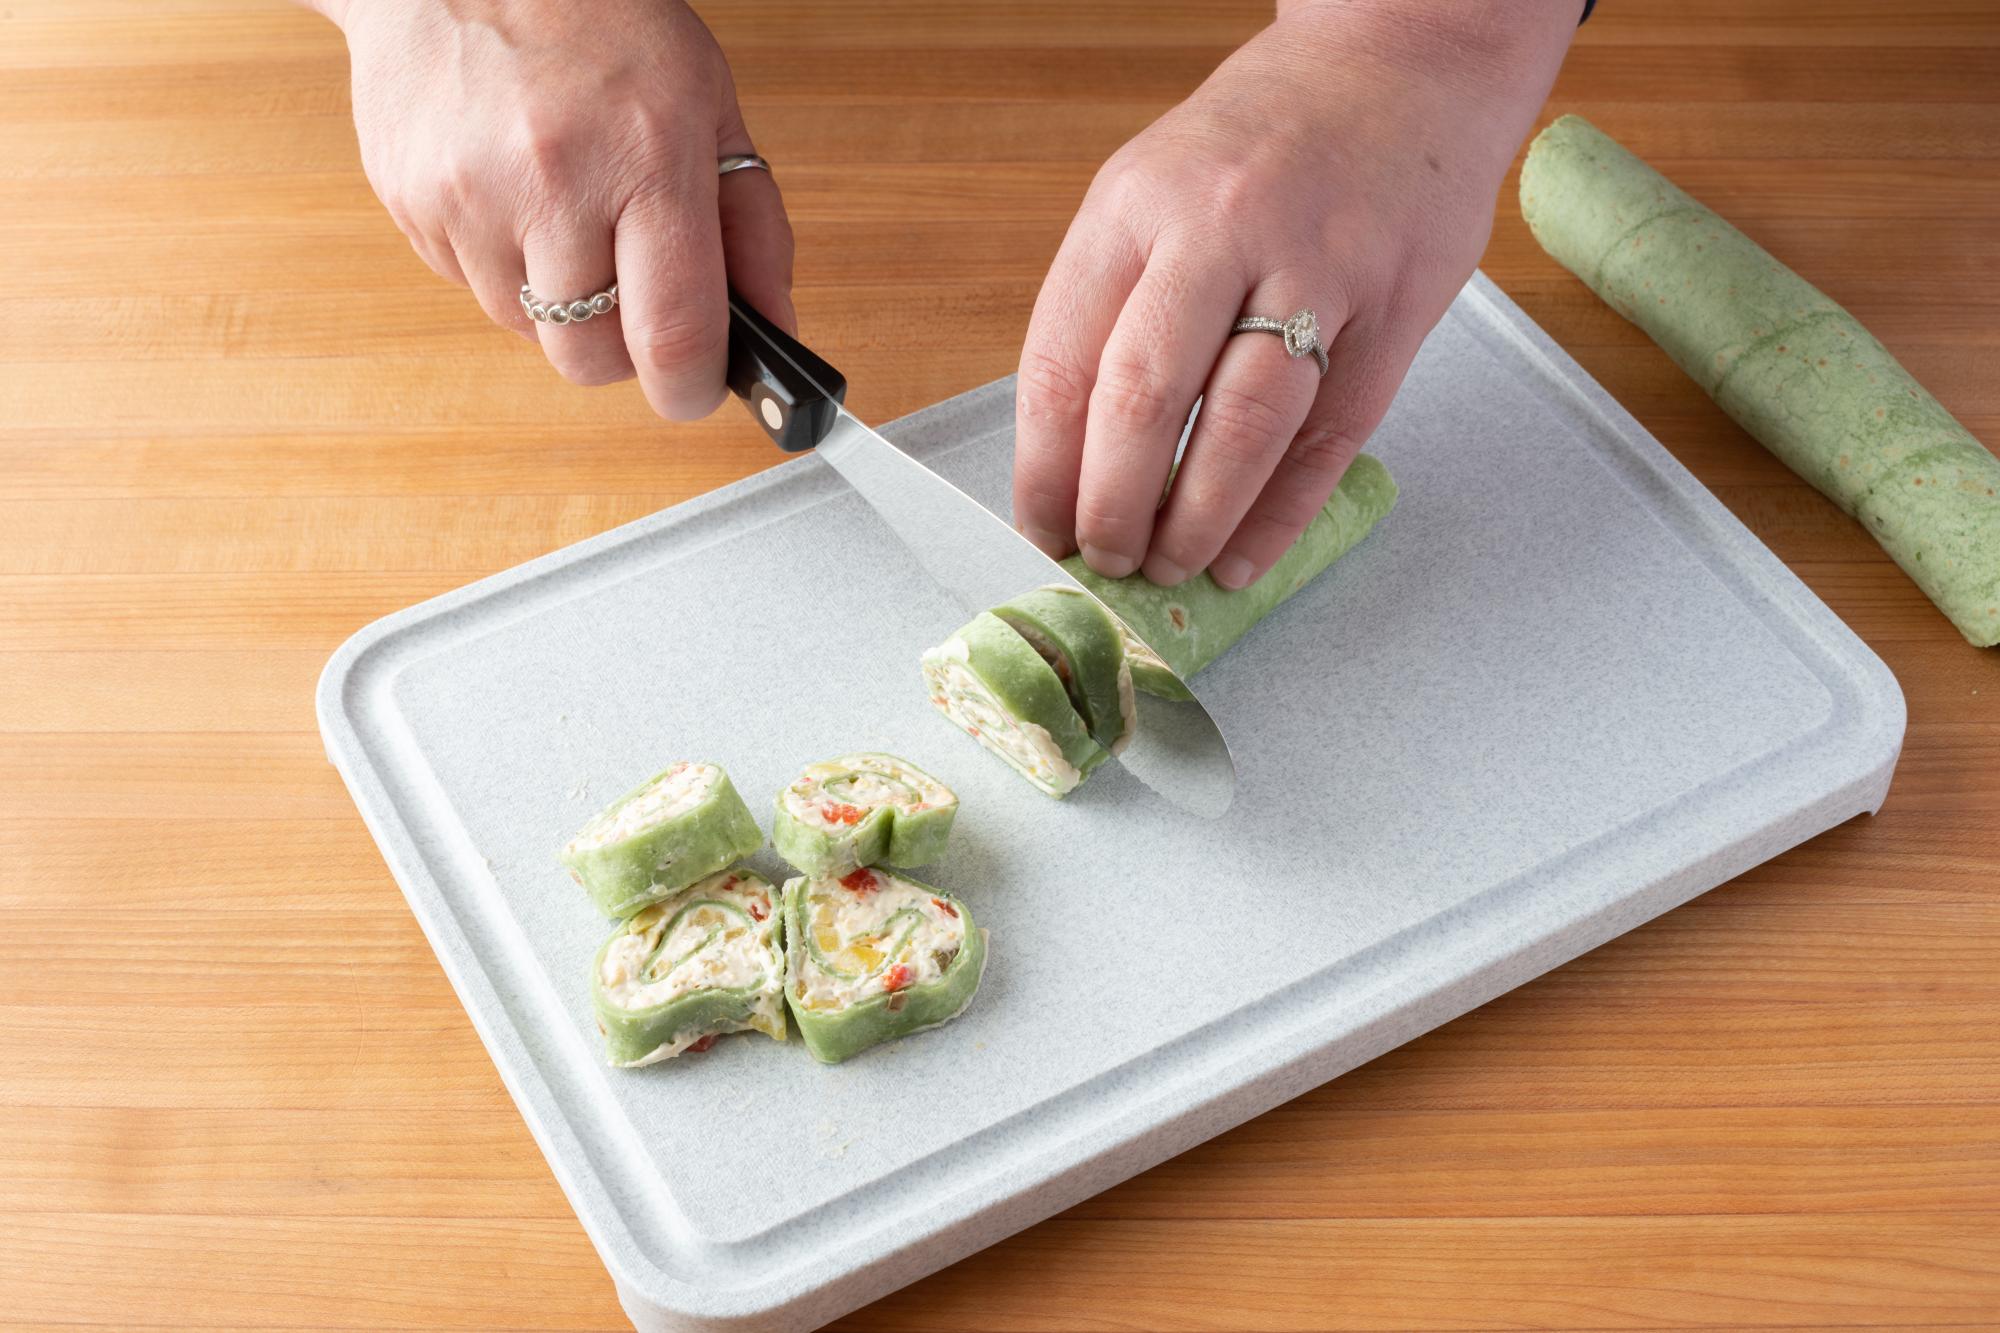 Slicing the rolls with a Spatula Spreader.